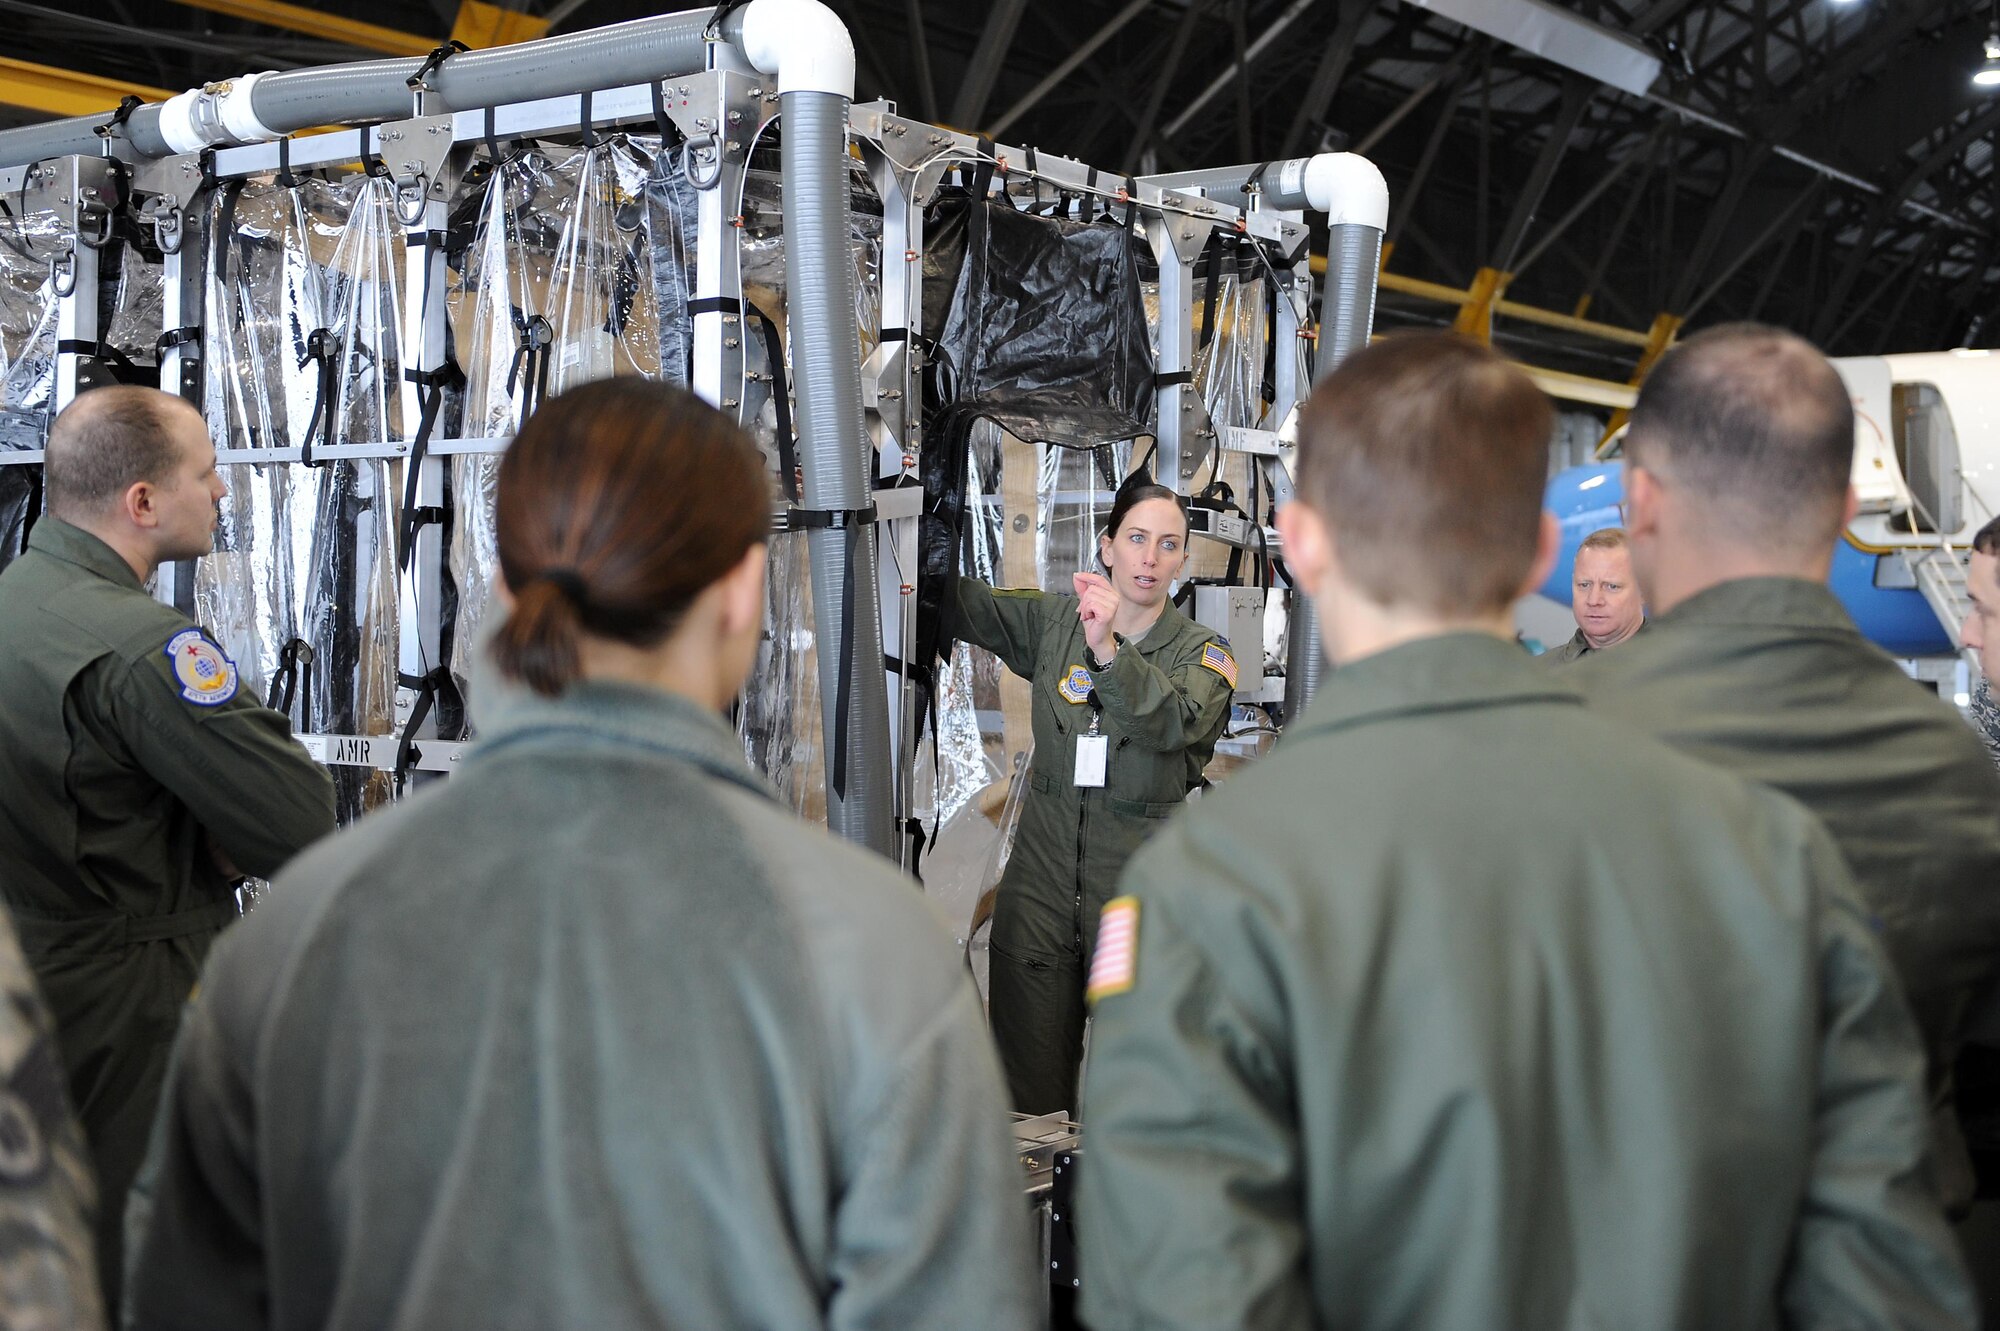 Capt. Michelle Pierson discusses the components of the Transport Isolation System (TIS) to members of the 375th and 932nd Aeromedical Evacuation Squadrons Jan. 26, 2015, at Scott Air Force Base, Illinois. Pierson was one of many Scott AFB members who has been, and will continue to advise Production Products Inc., the company who built the TIS. She is also one of the members responsible for writing all the new regulations and guidance for AMC. Pierson is an Air Mobility Command flight nurse evaluator. (U.S. Air Force photo/Staff Sgt. Jonathan Fowler)